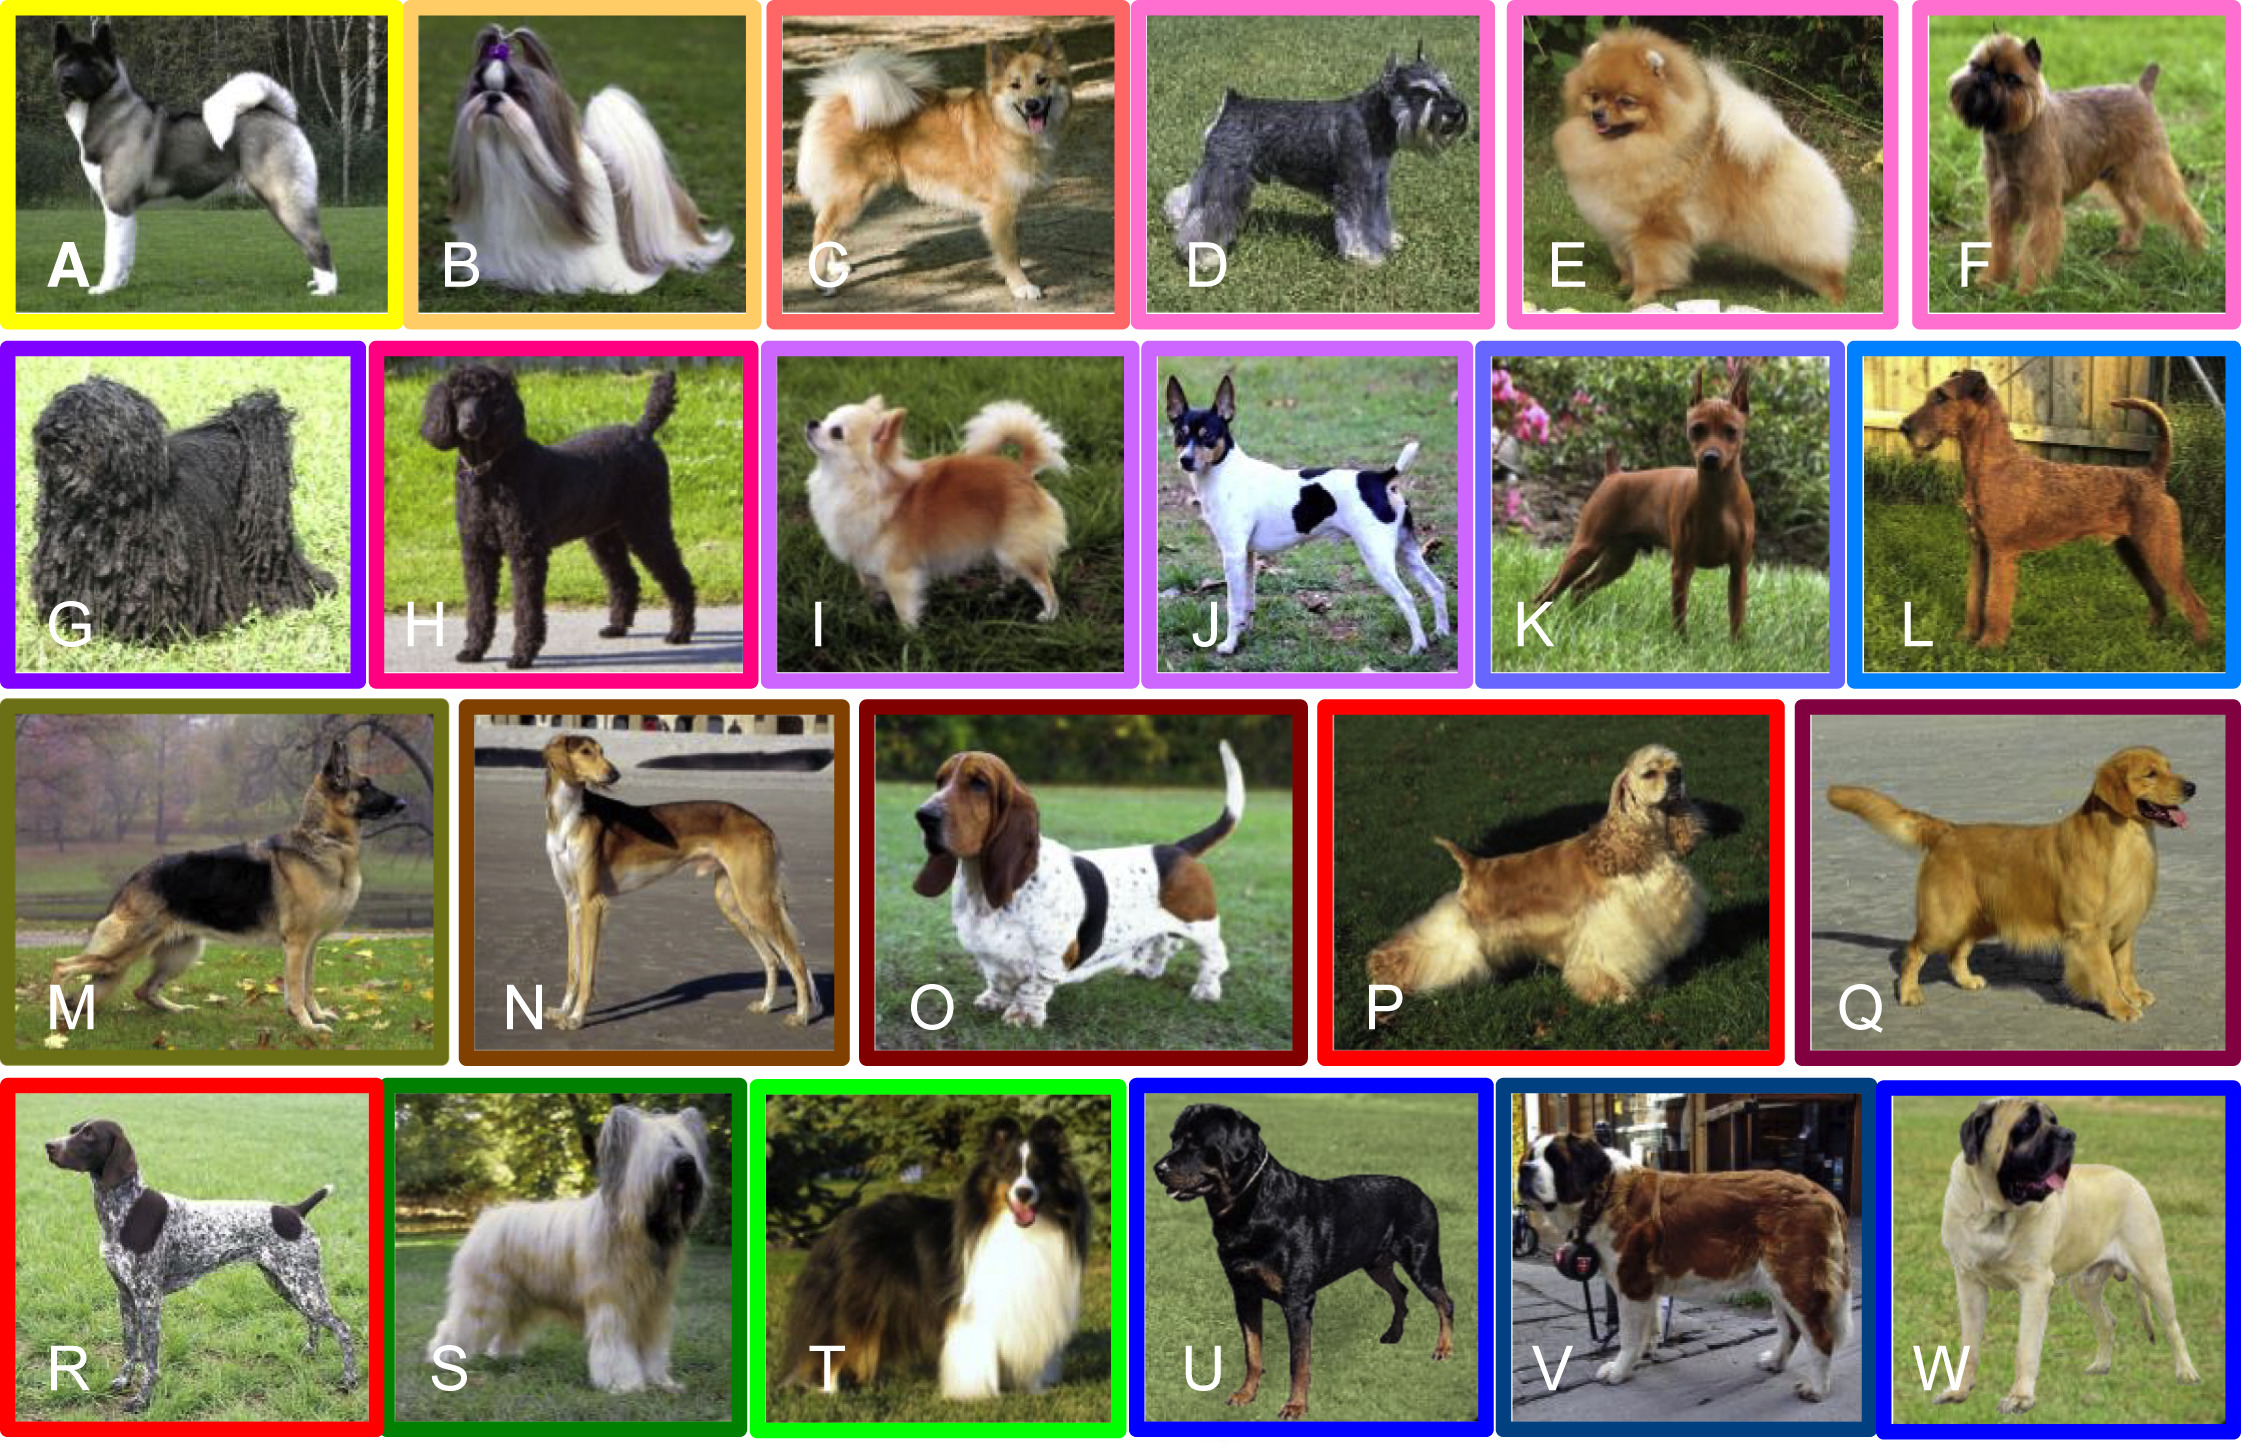 Composite image showing numerous photographs of different breeds of dogs.